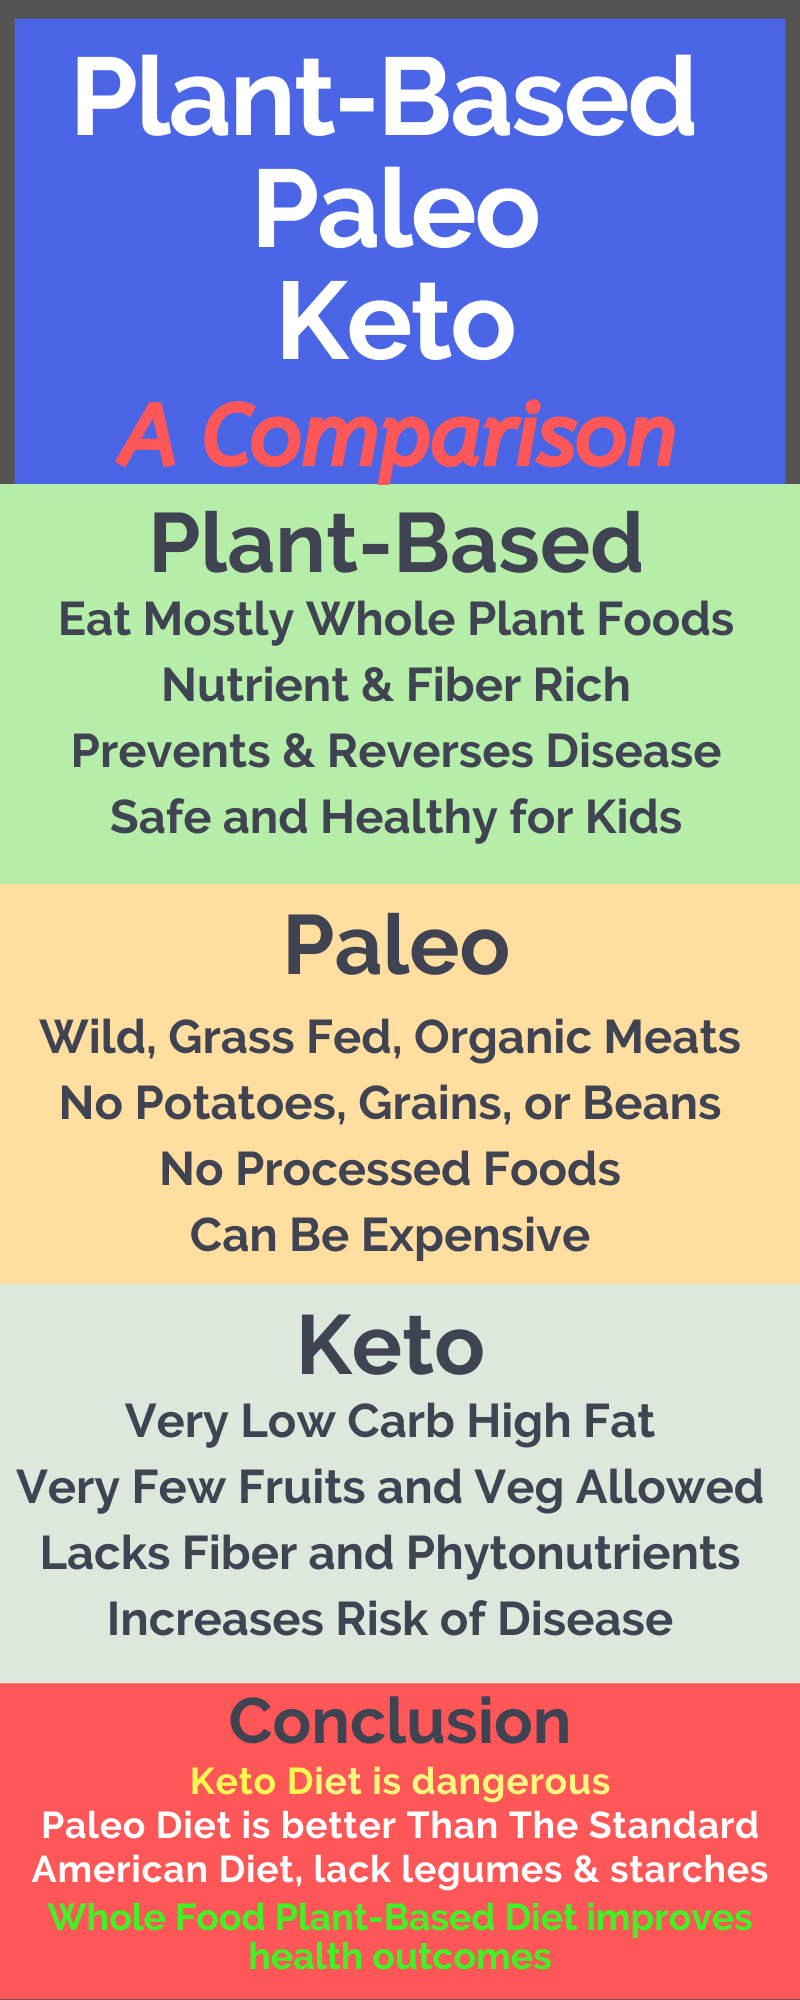 Paleo, Keto the Difference?) — leafy